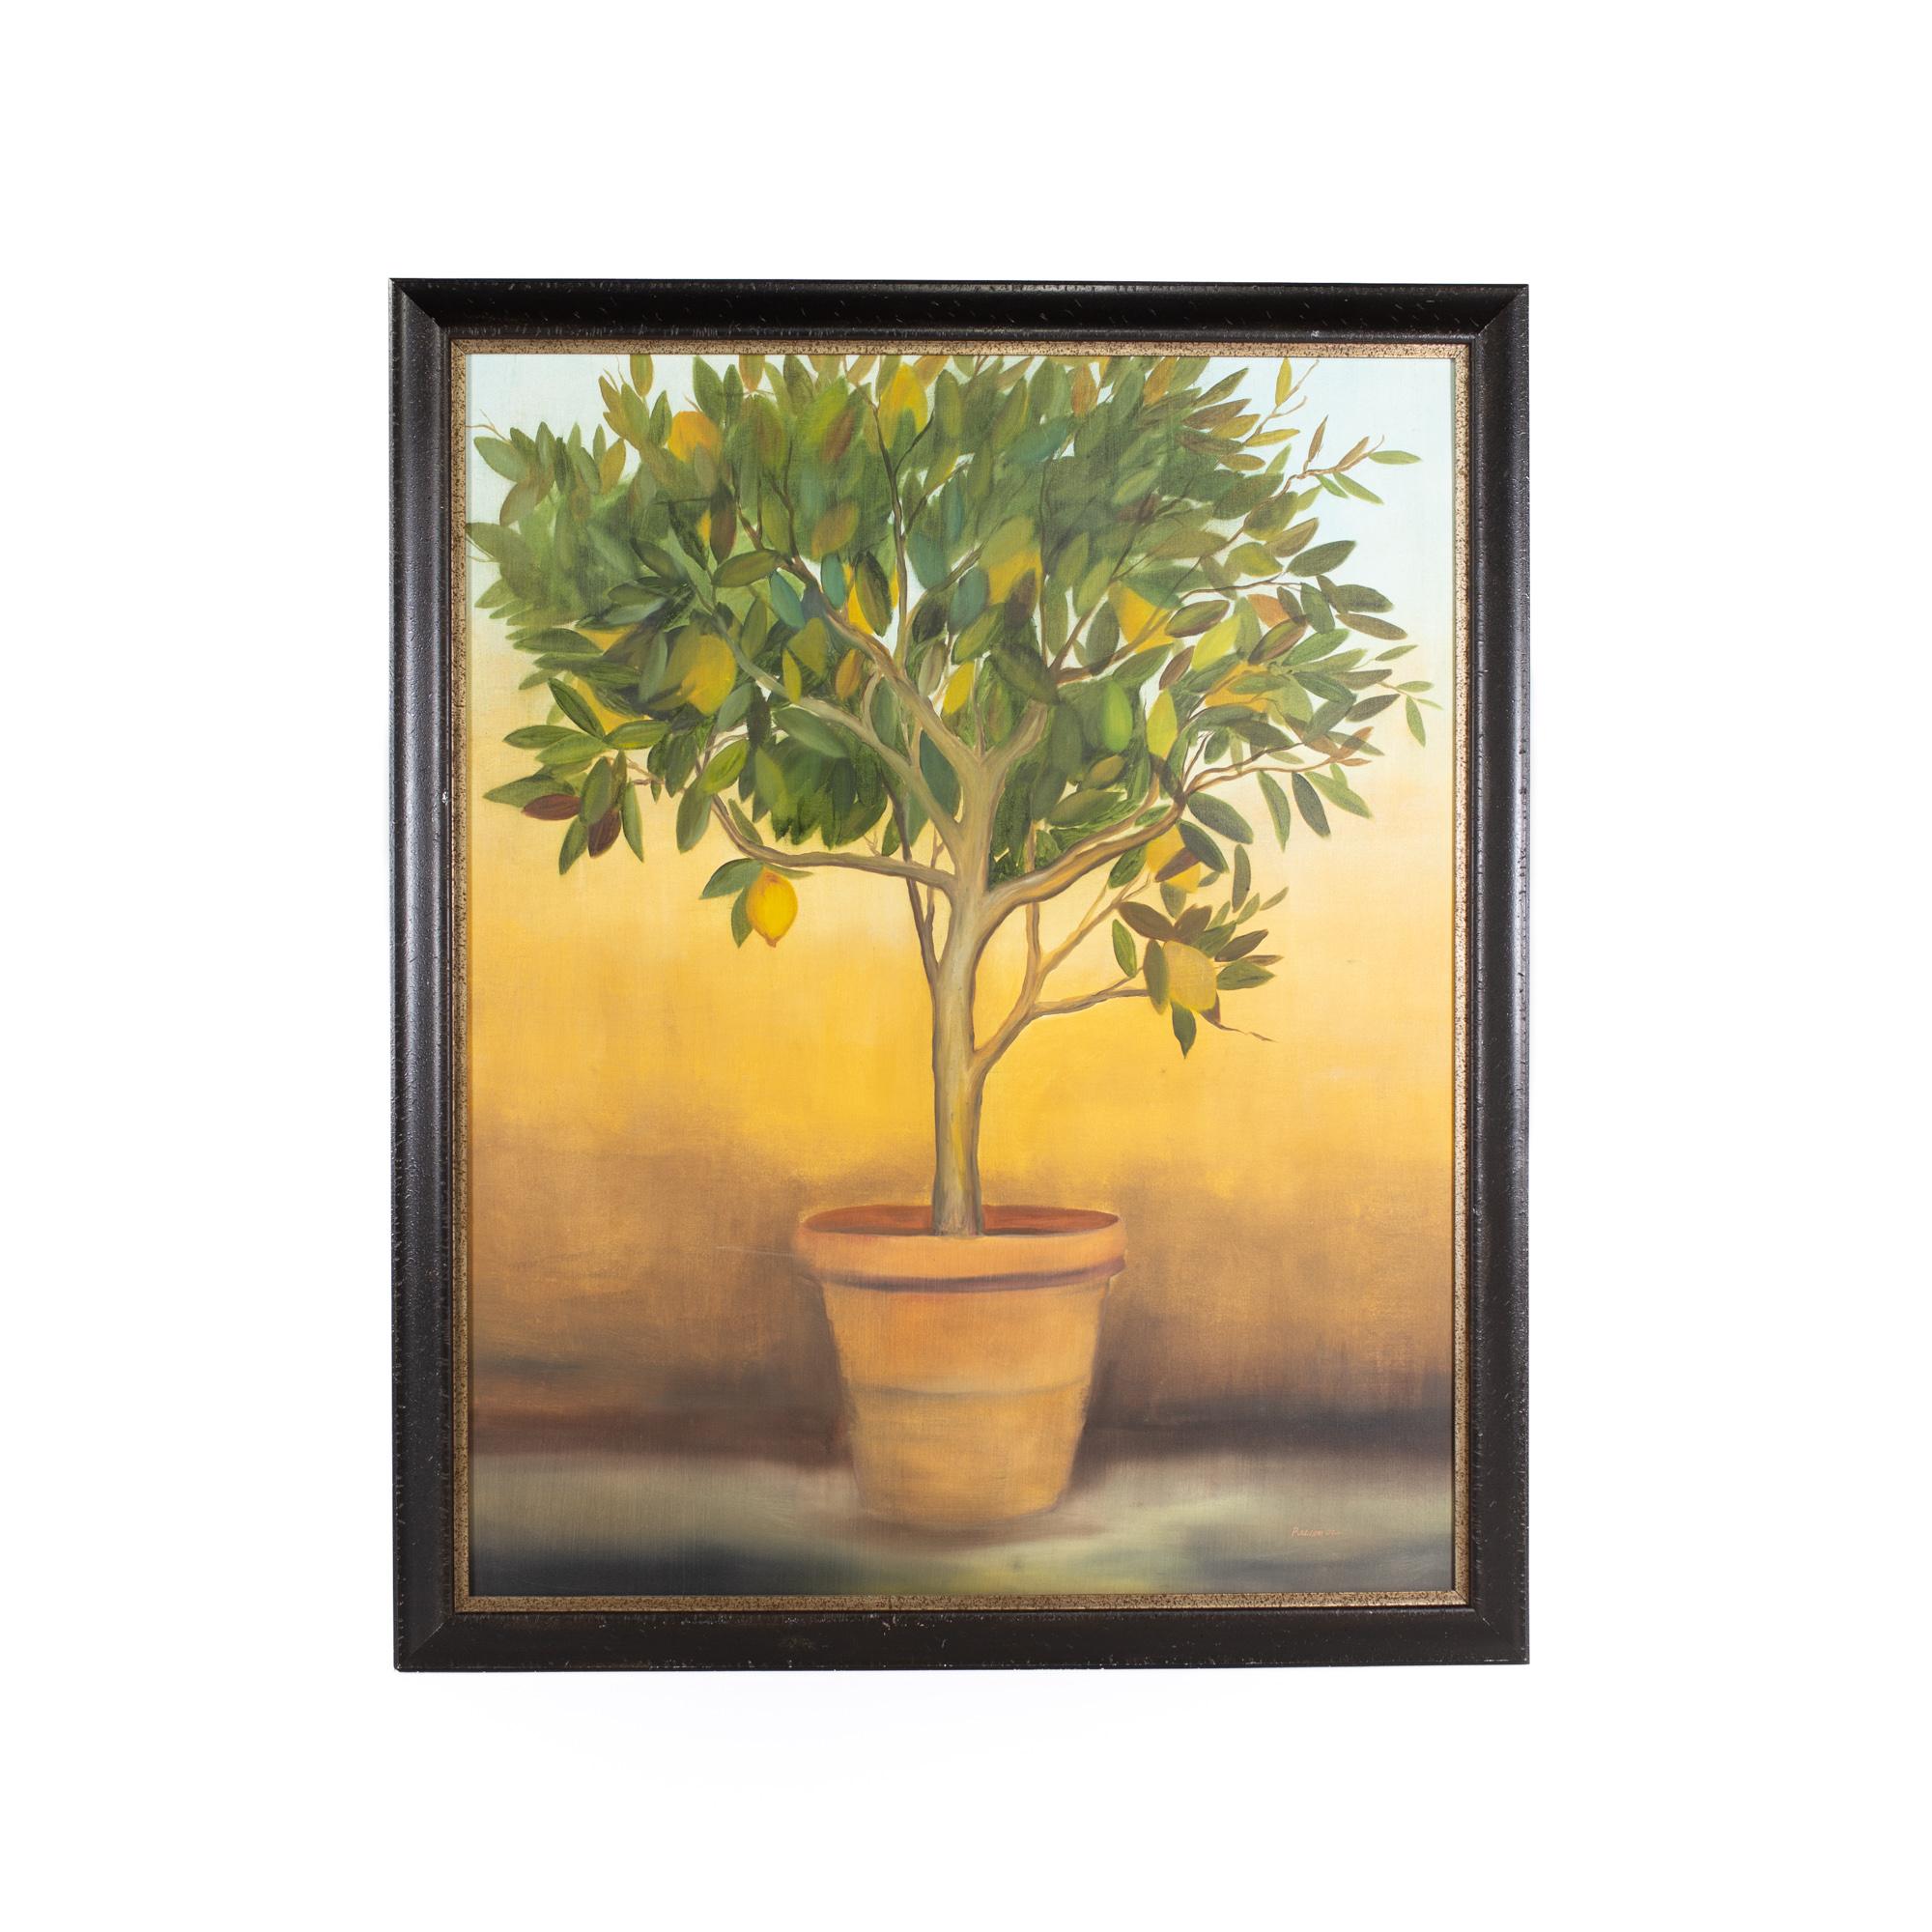 Framed Lemon tree painting on canvas

This painting measures: 55 wide x 1.5 deep x 67 inches high

This painting is in good vintage condition with minor marks, dents, and wear.

We take our photos in a controlled lighting studio to show as